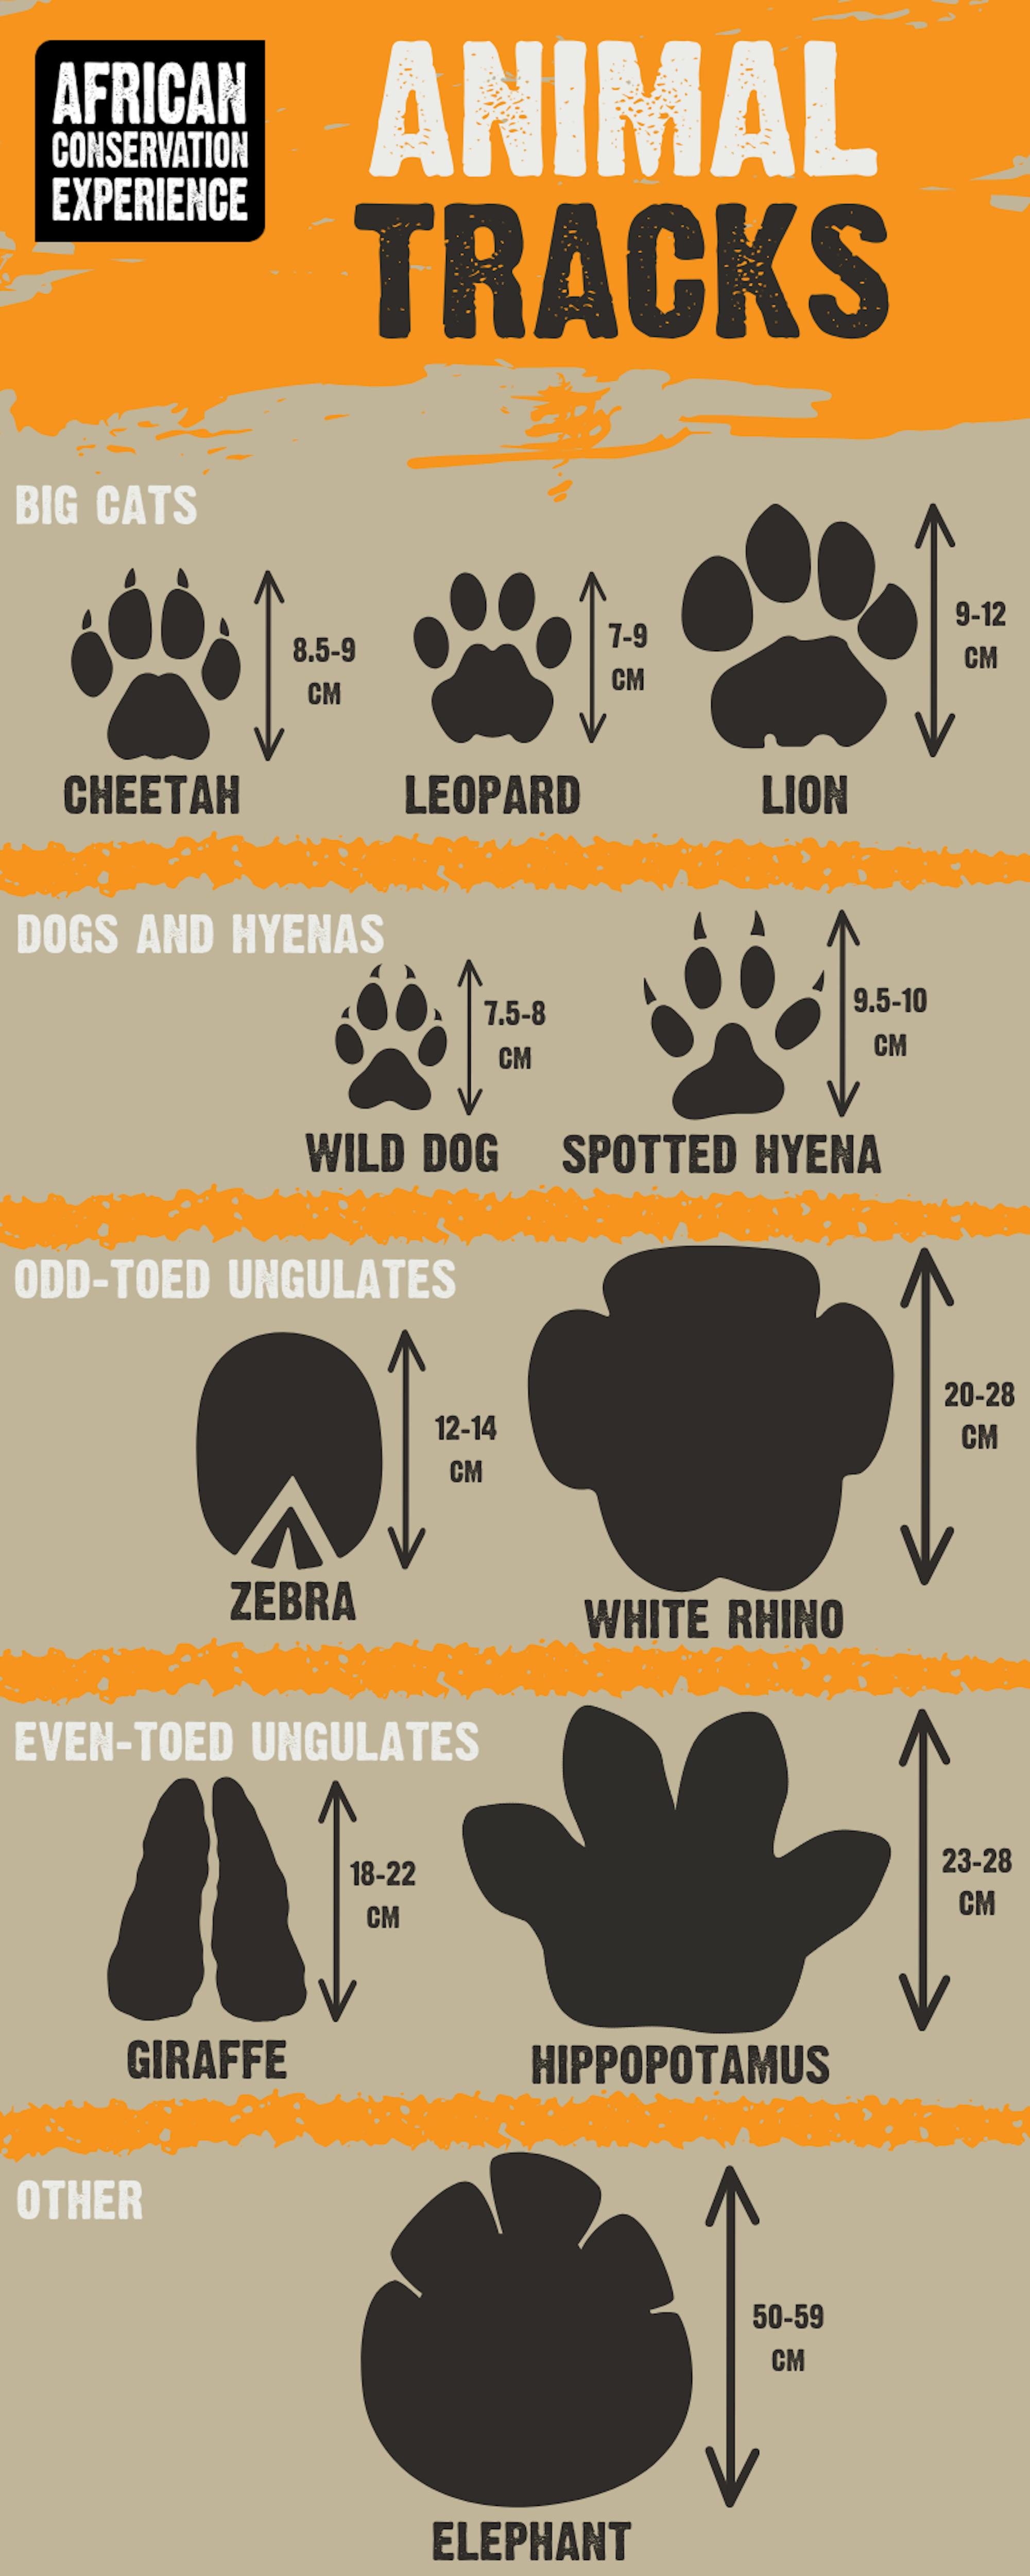 An infographic of animal of different animal tracks with size references.